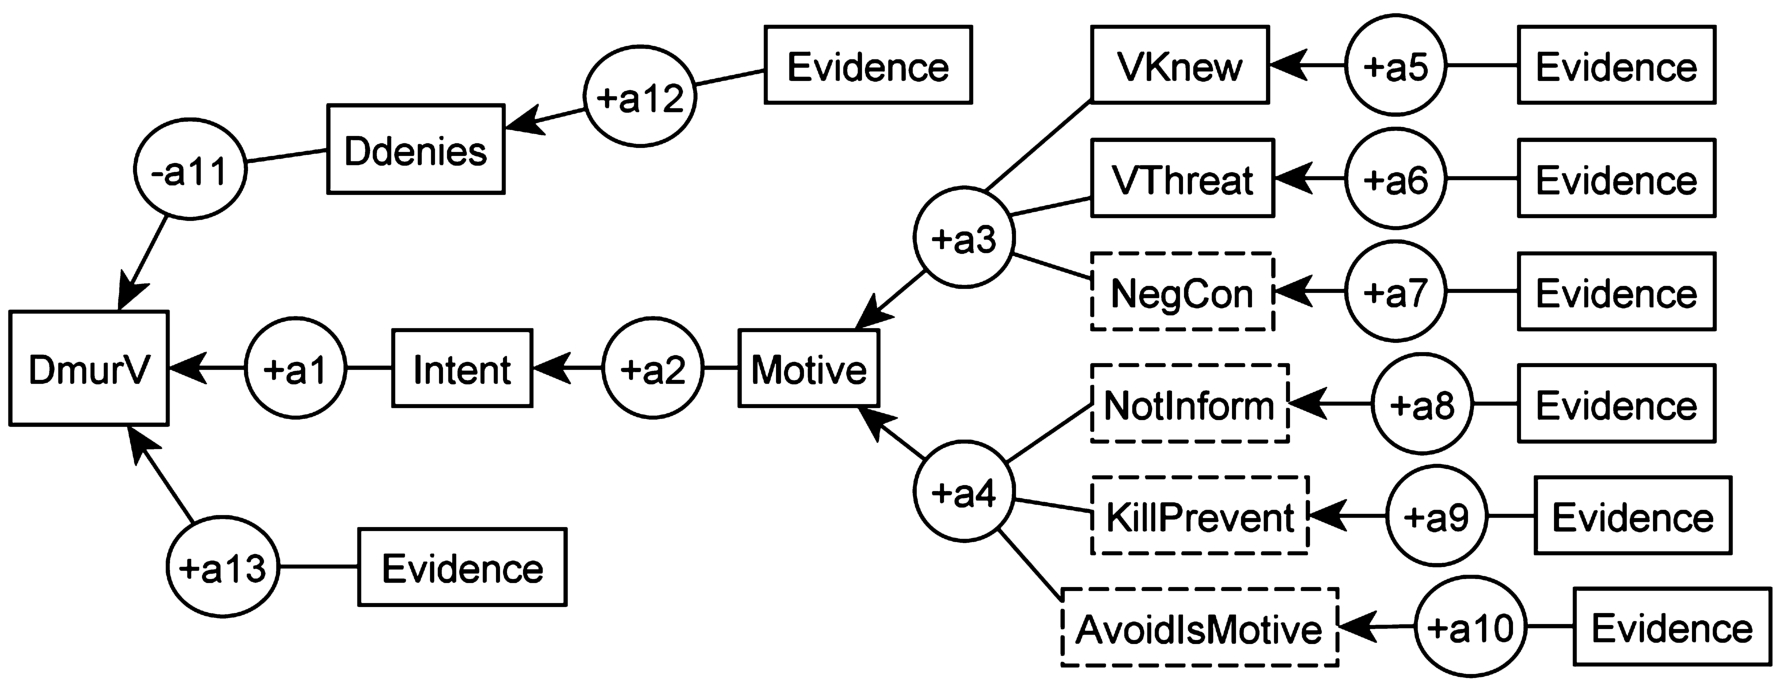 The structure of argumentation from motive to intent in a typical case.